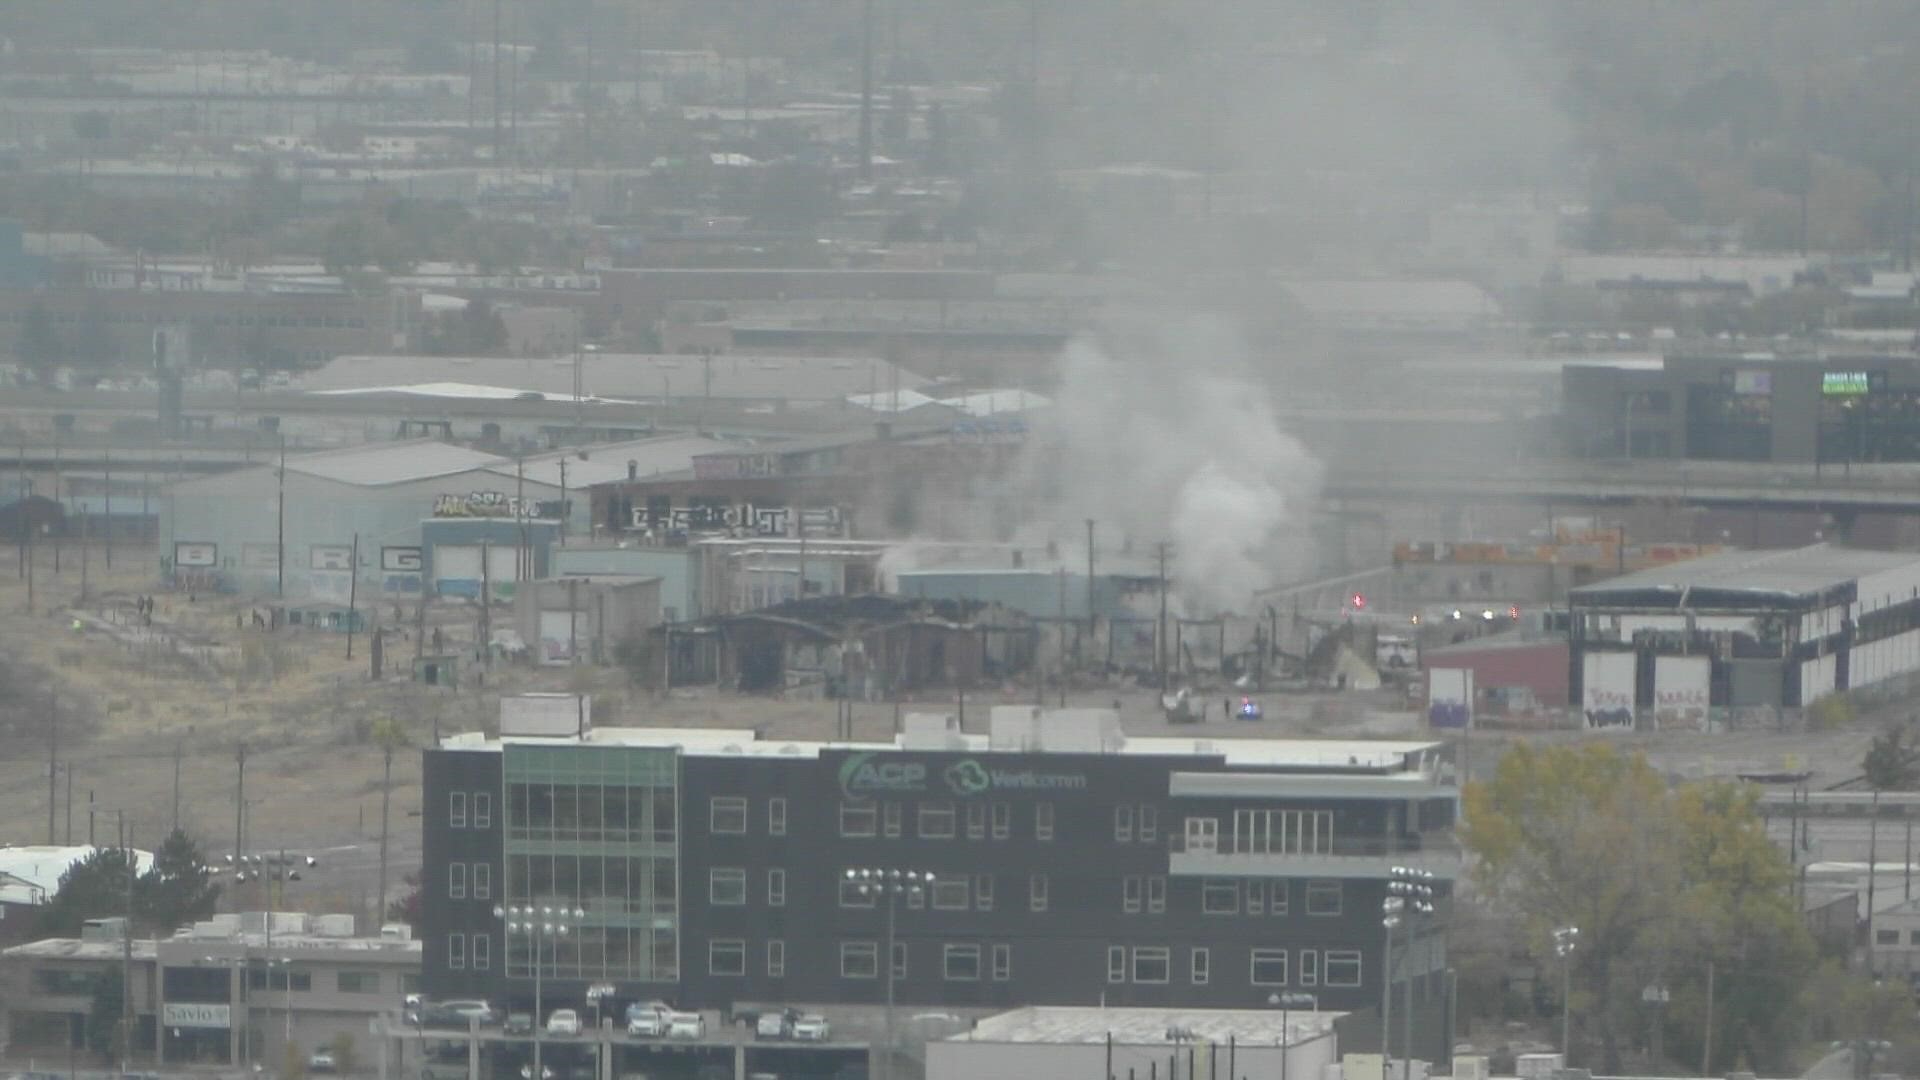 Denver firefighters responded to a fire in a commercial building near a central Denver rail yard Monday afternoon.